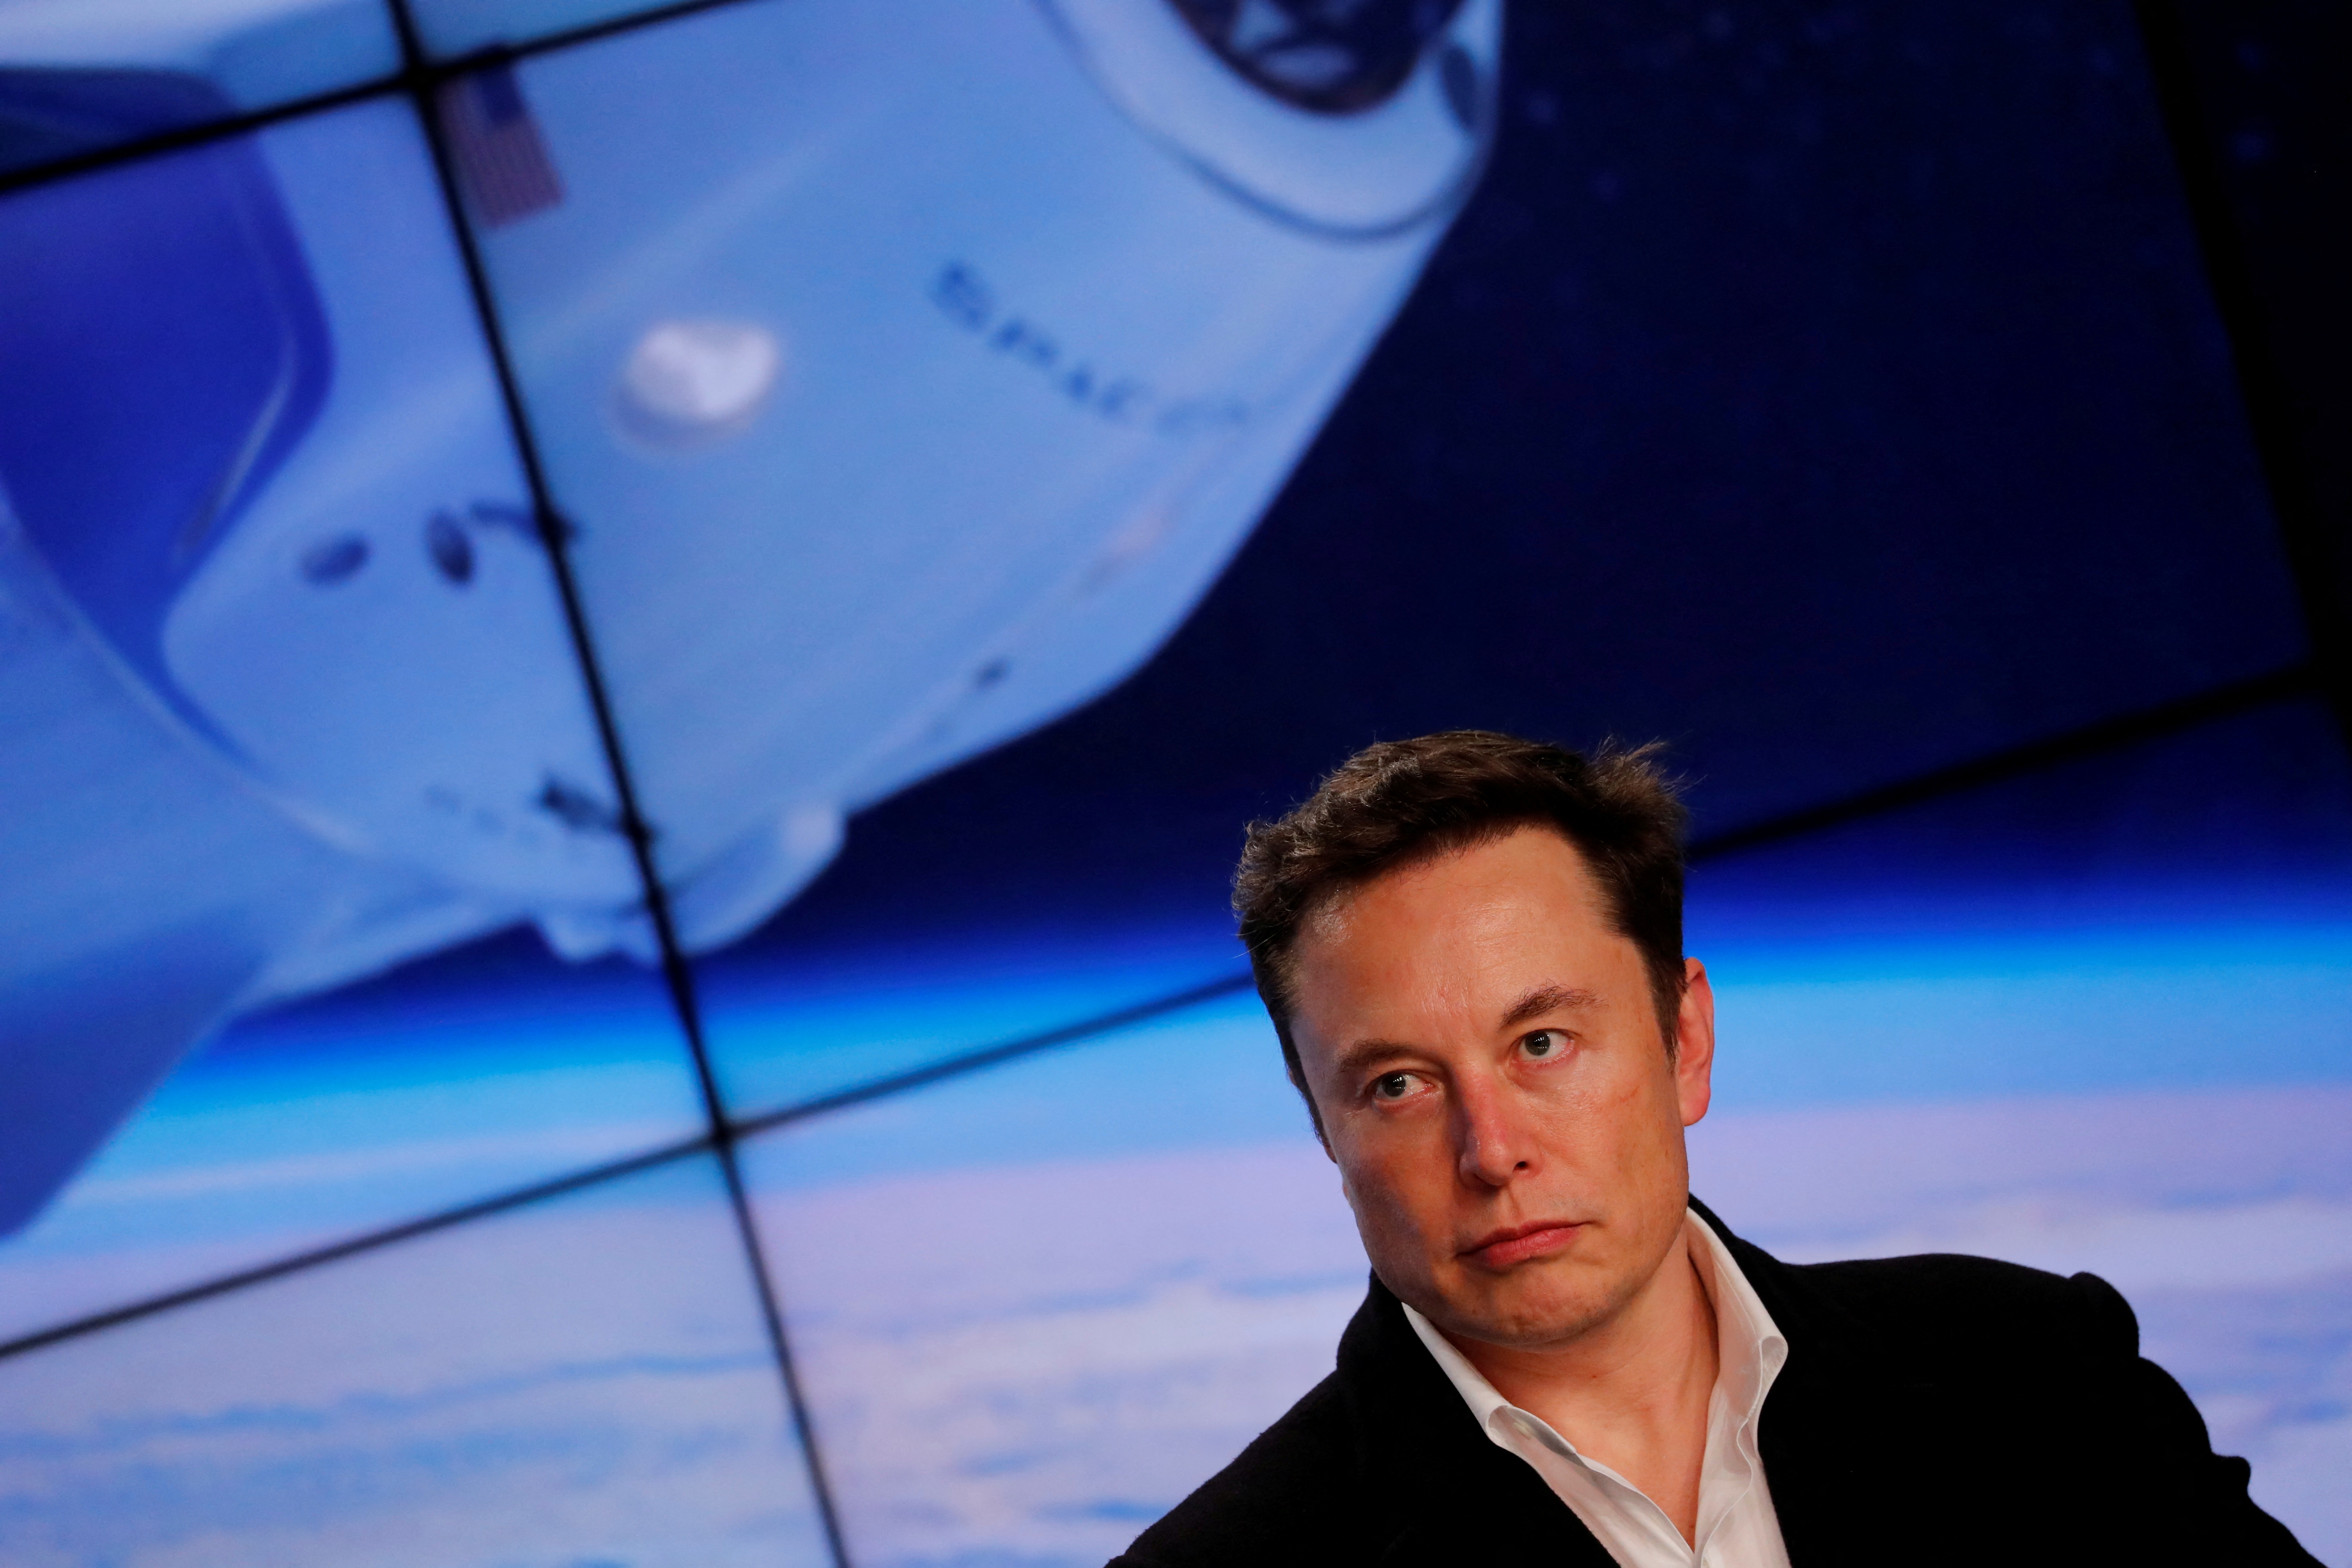 SpaceX founder Elon Musk speaks at a post-launch press conference in Cape Canaveral